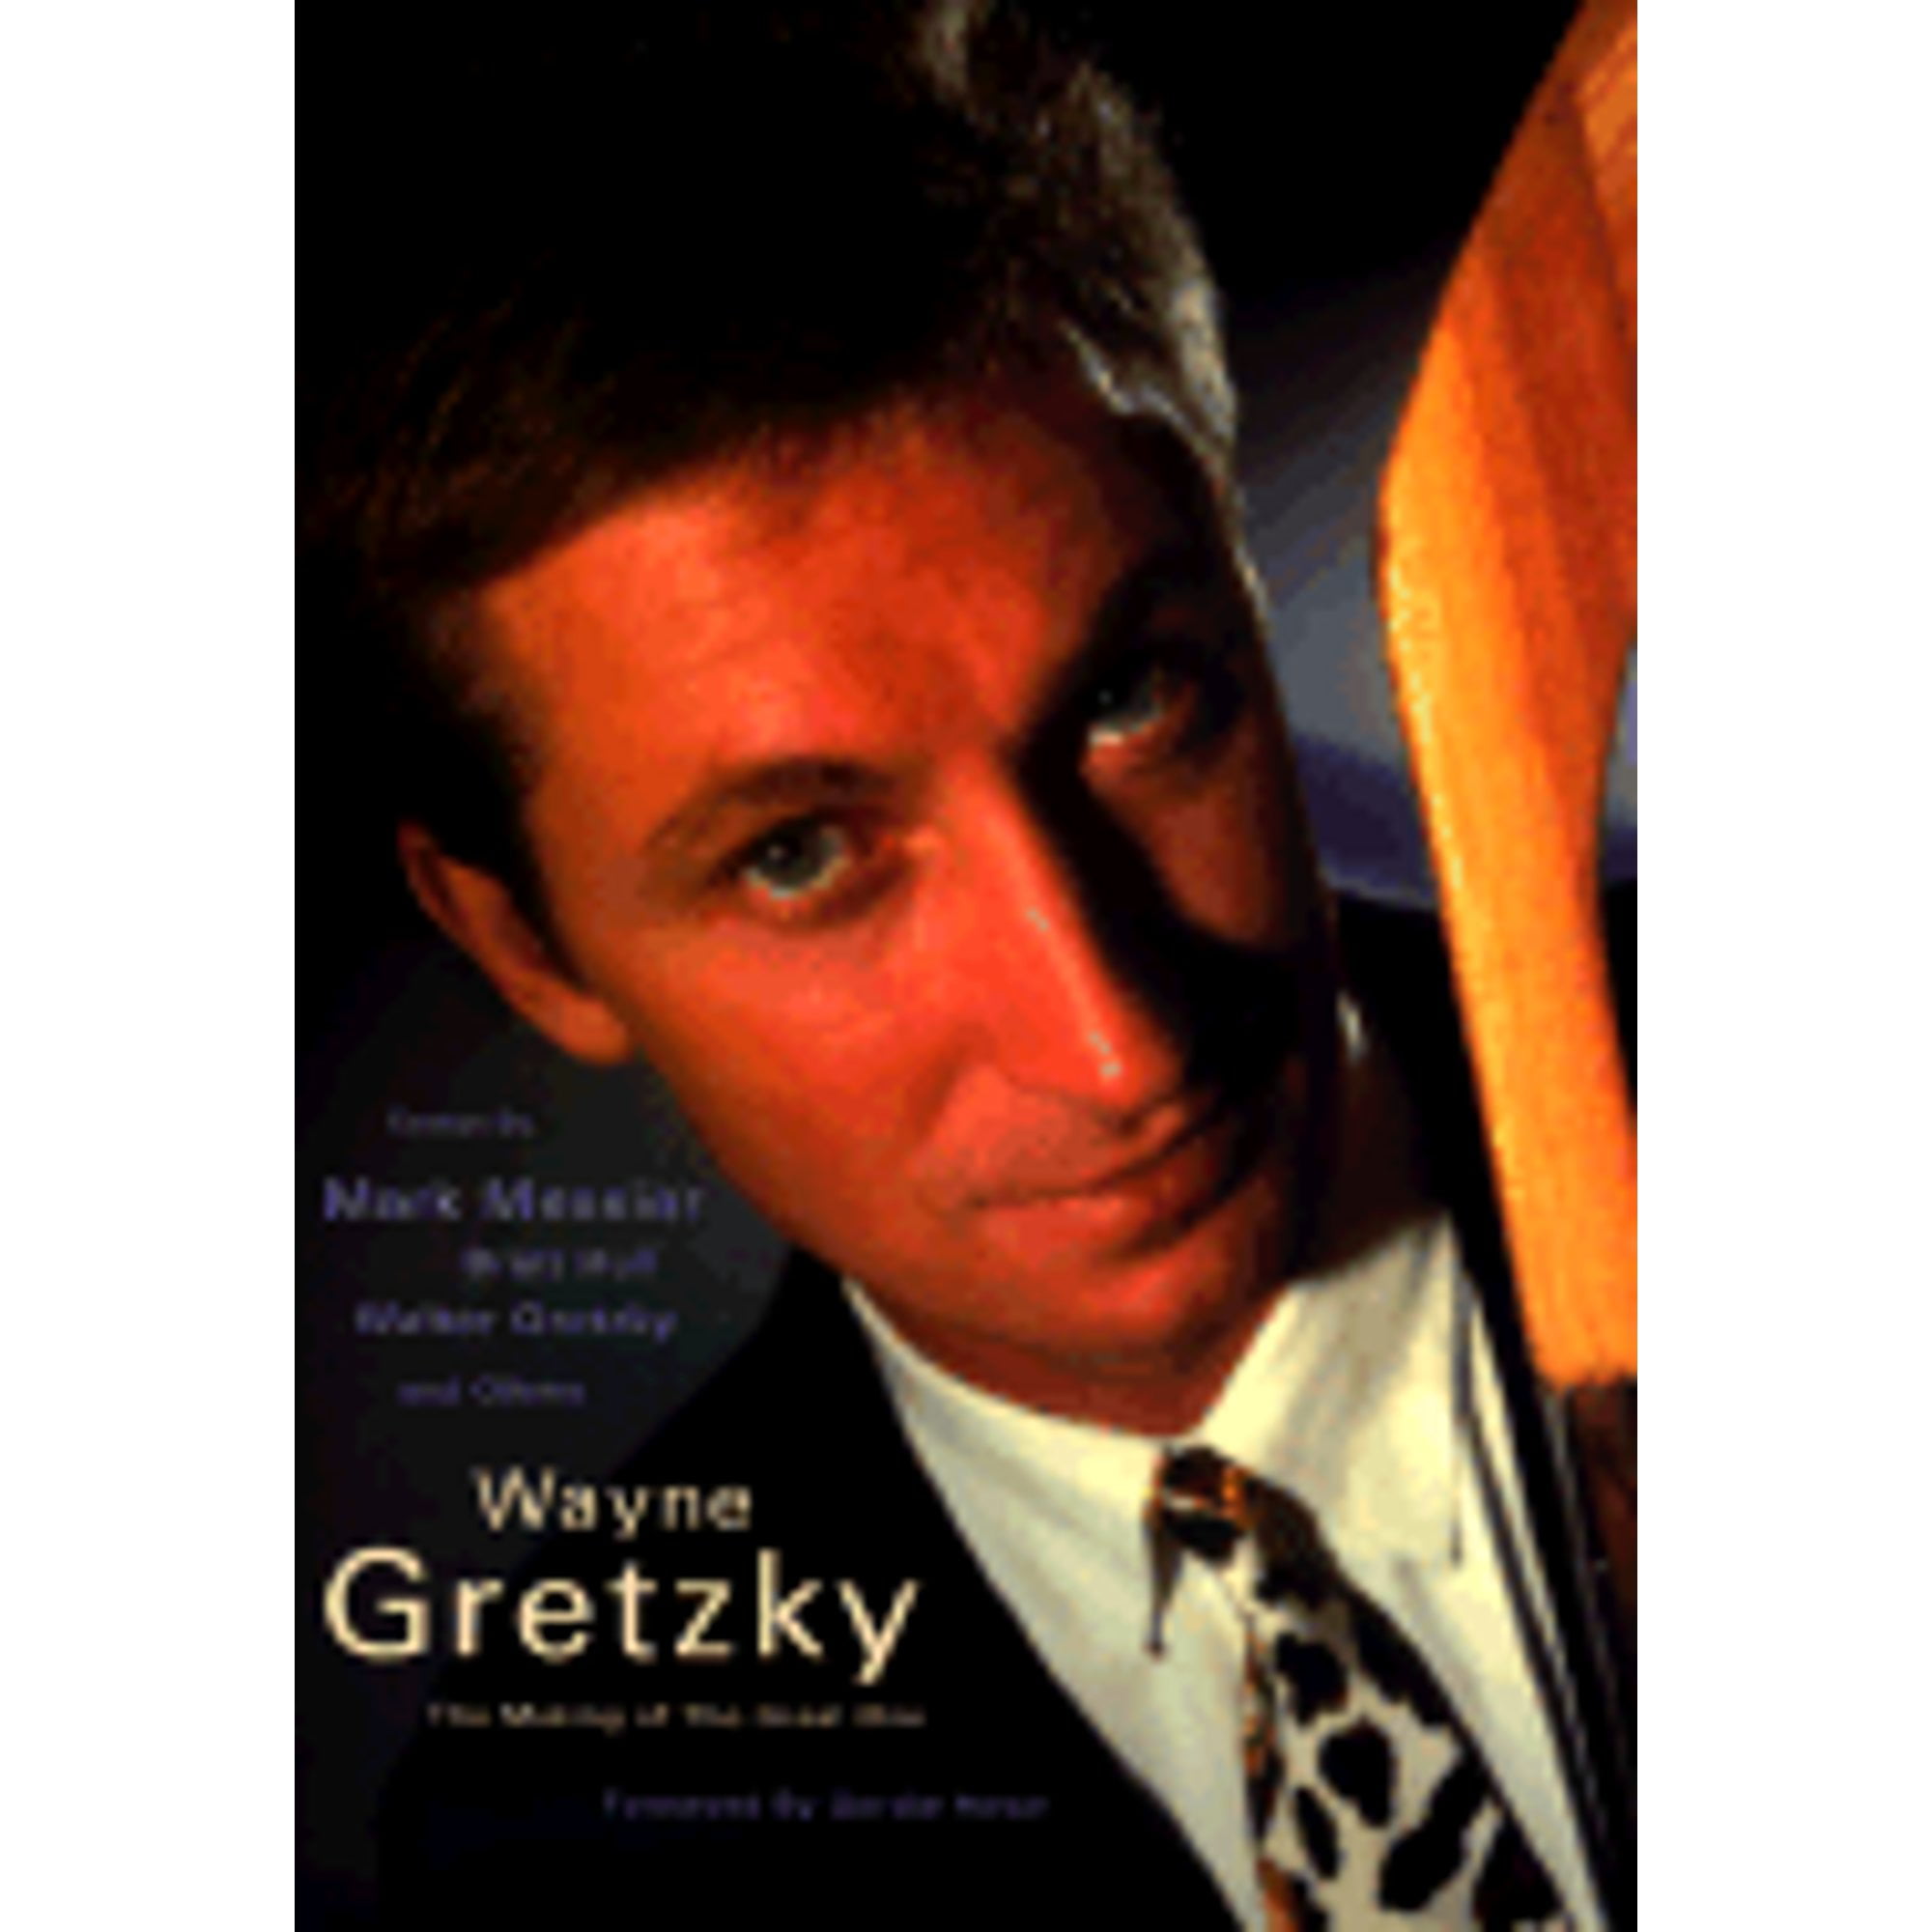 Wayne Gretzky: The Making of the Great book by Walter Gretzky